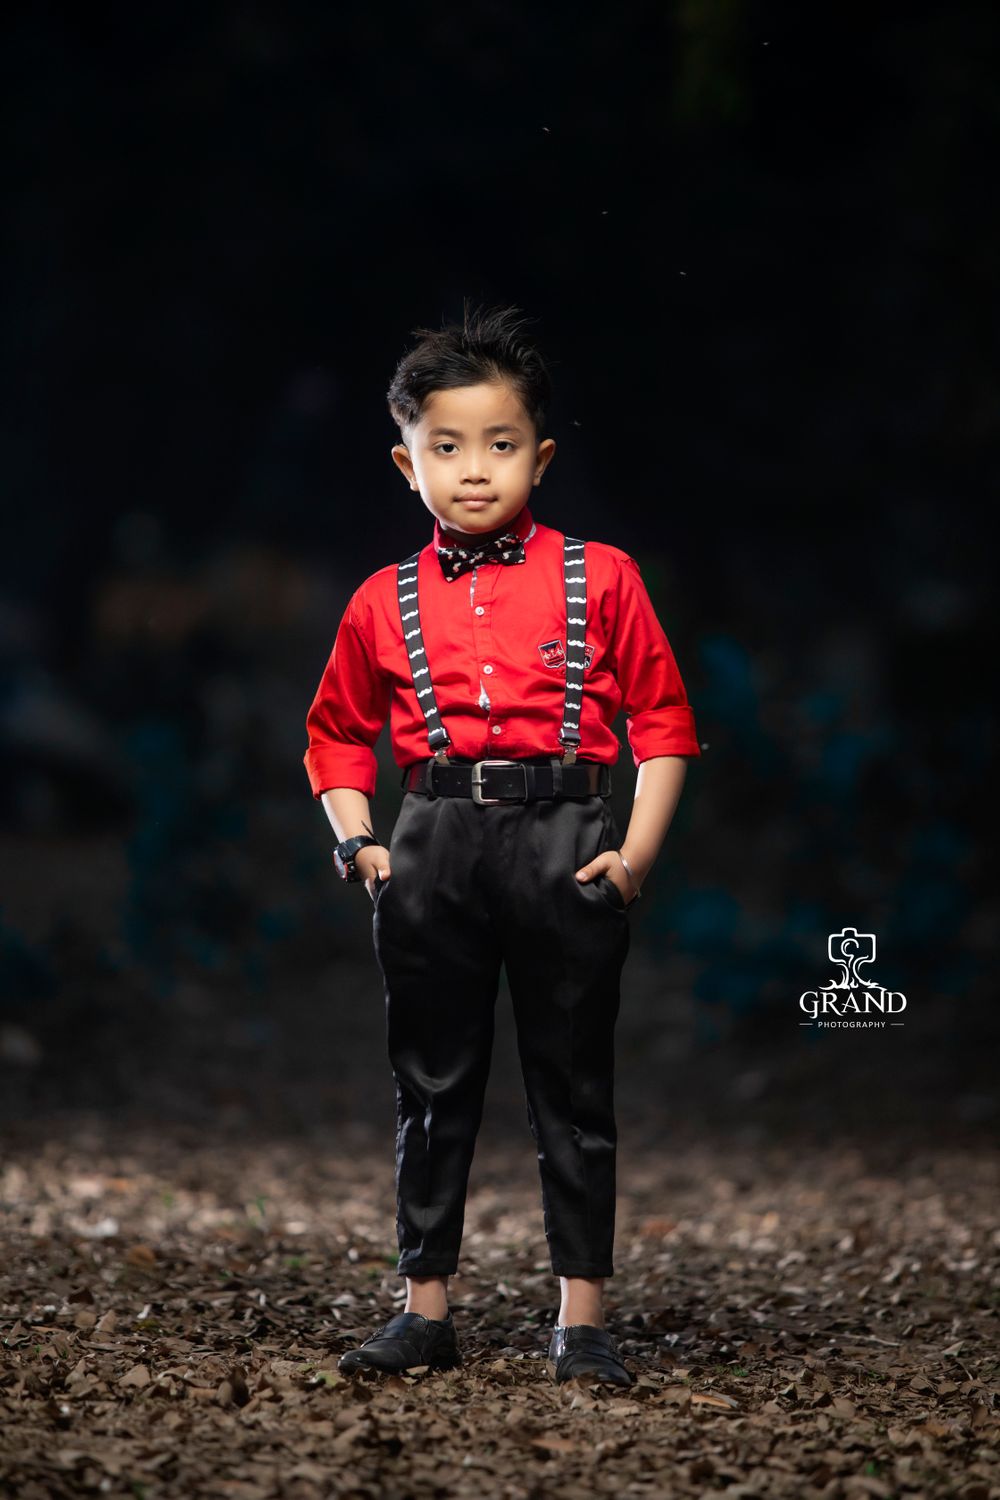 Photo From kids - By Grand Photography